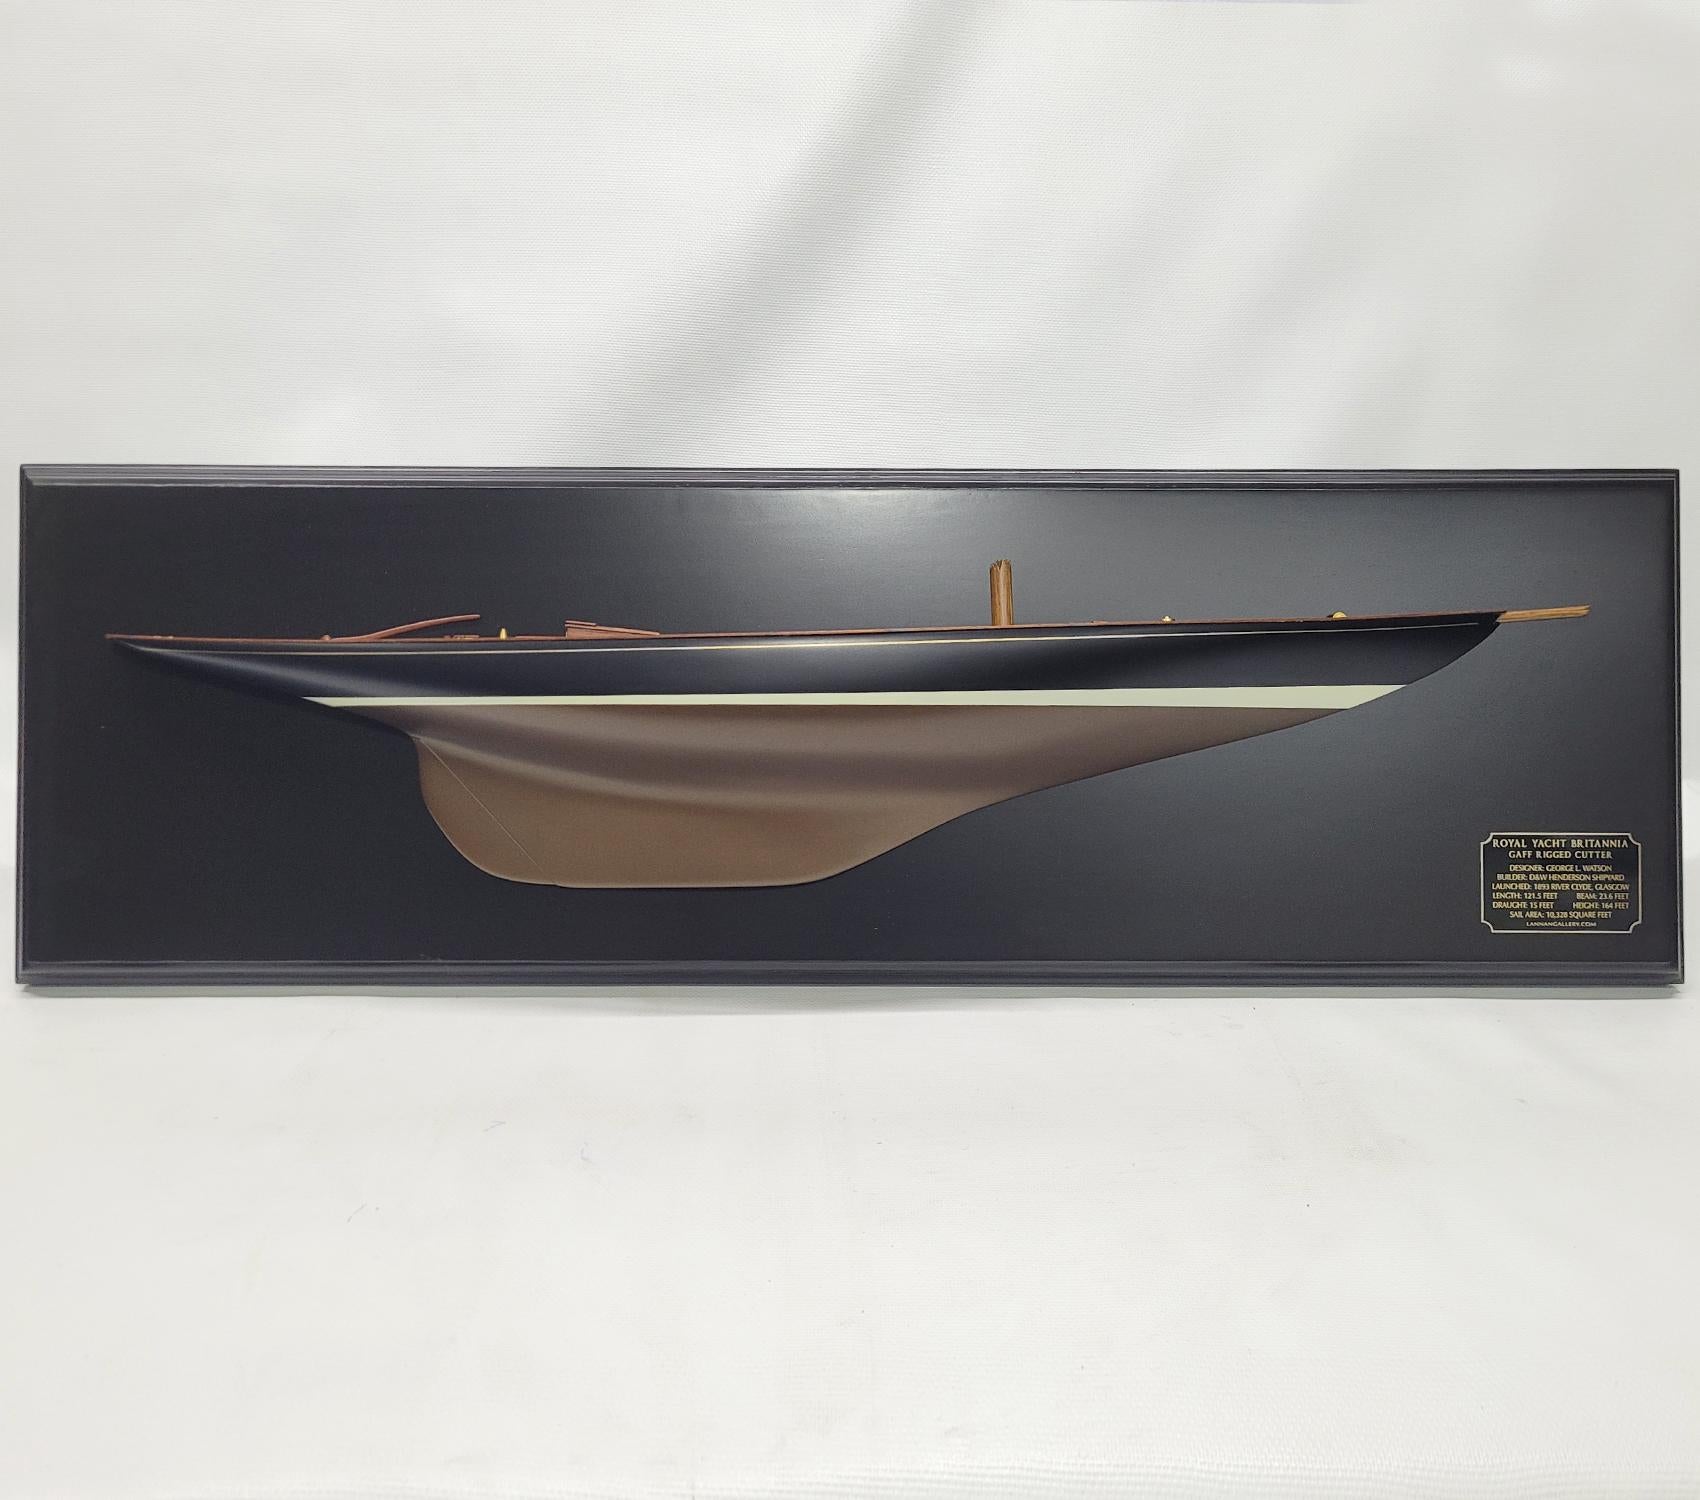 Scale half model of the British Royal racing yacht “Britannia”. Large model with hull painted black over bronze. Planked deck with skylights, tiller, companion ways, stubbed mast, anchor, bowsprit etc. There are six mahogany skylights all fitted